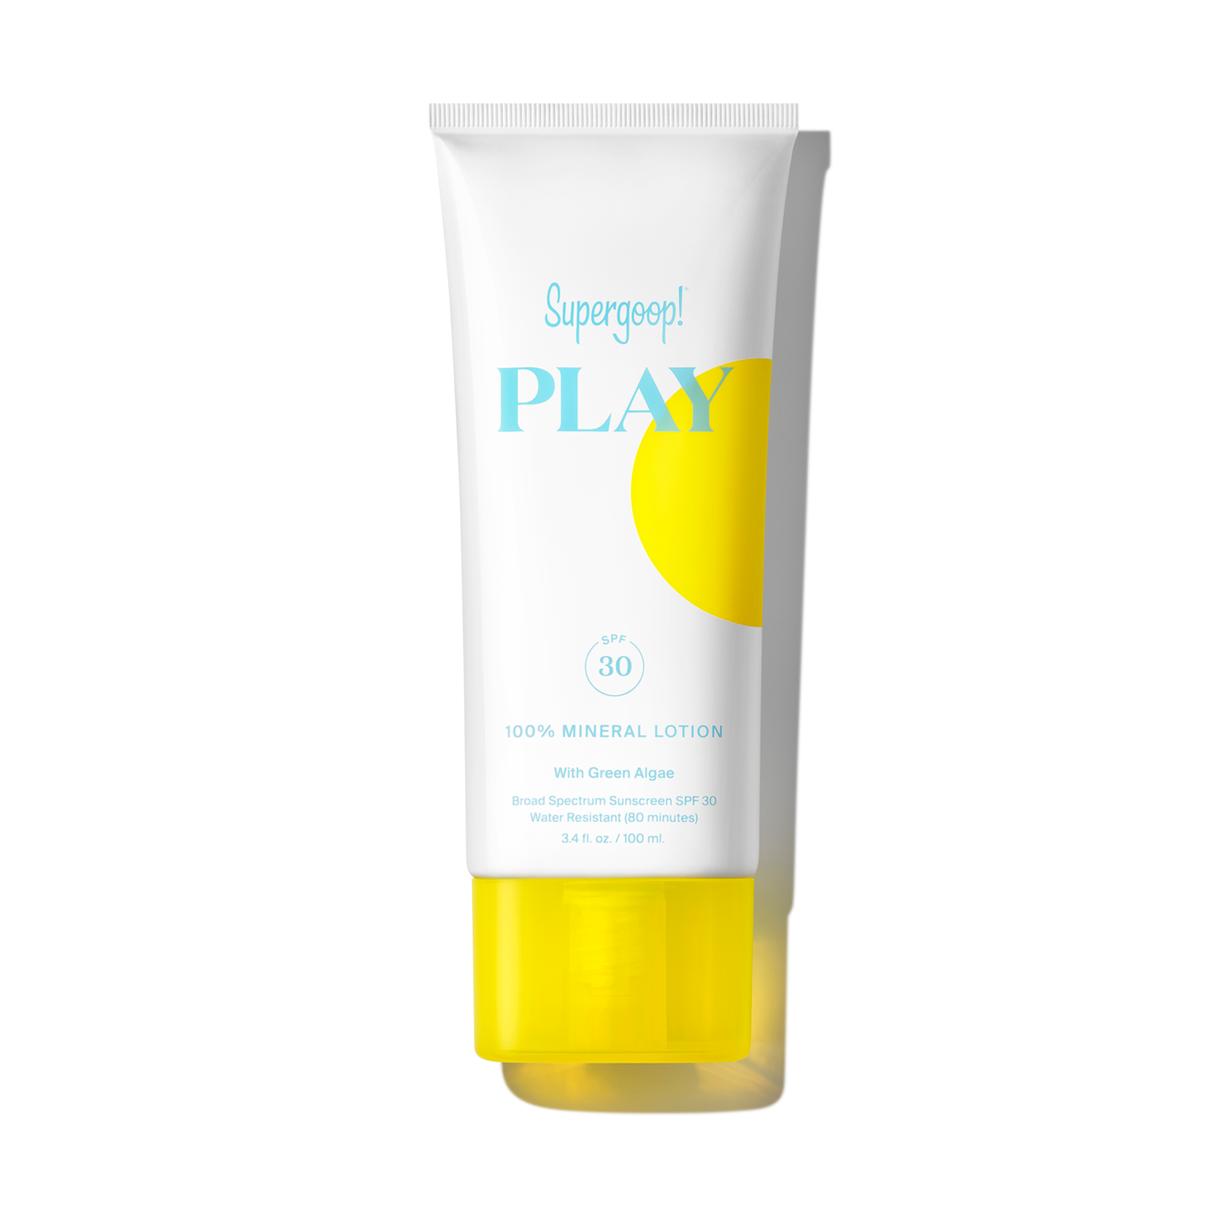 Supergoop PLAY 100% Mineral Lotion SPF 30 with Green Algae